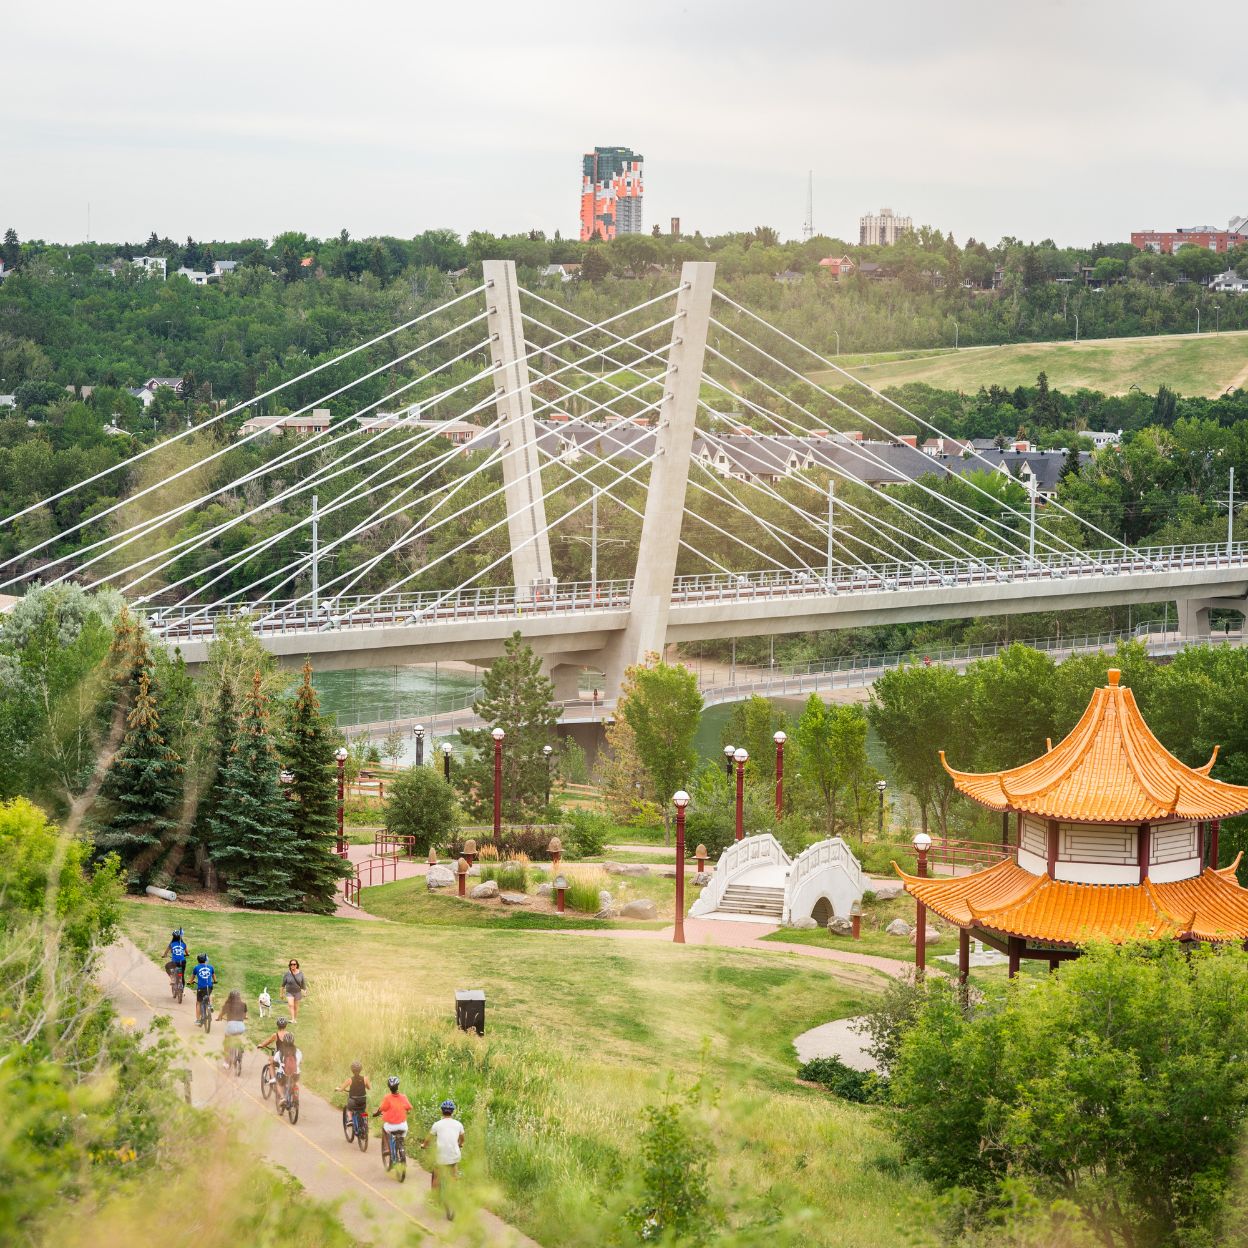 Edmonton-things-to-do-river-valley-food-bike-tour-alberta-tours-cute-date-ideas-group-of-people-on-food-bike-tour-in-river-valley-Louise-McKinney-Riverfront-park